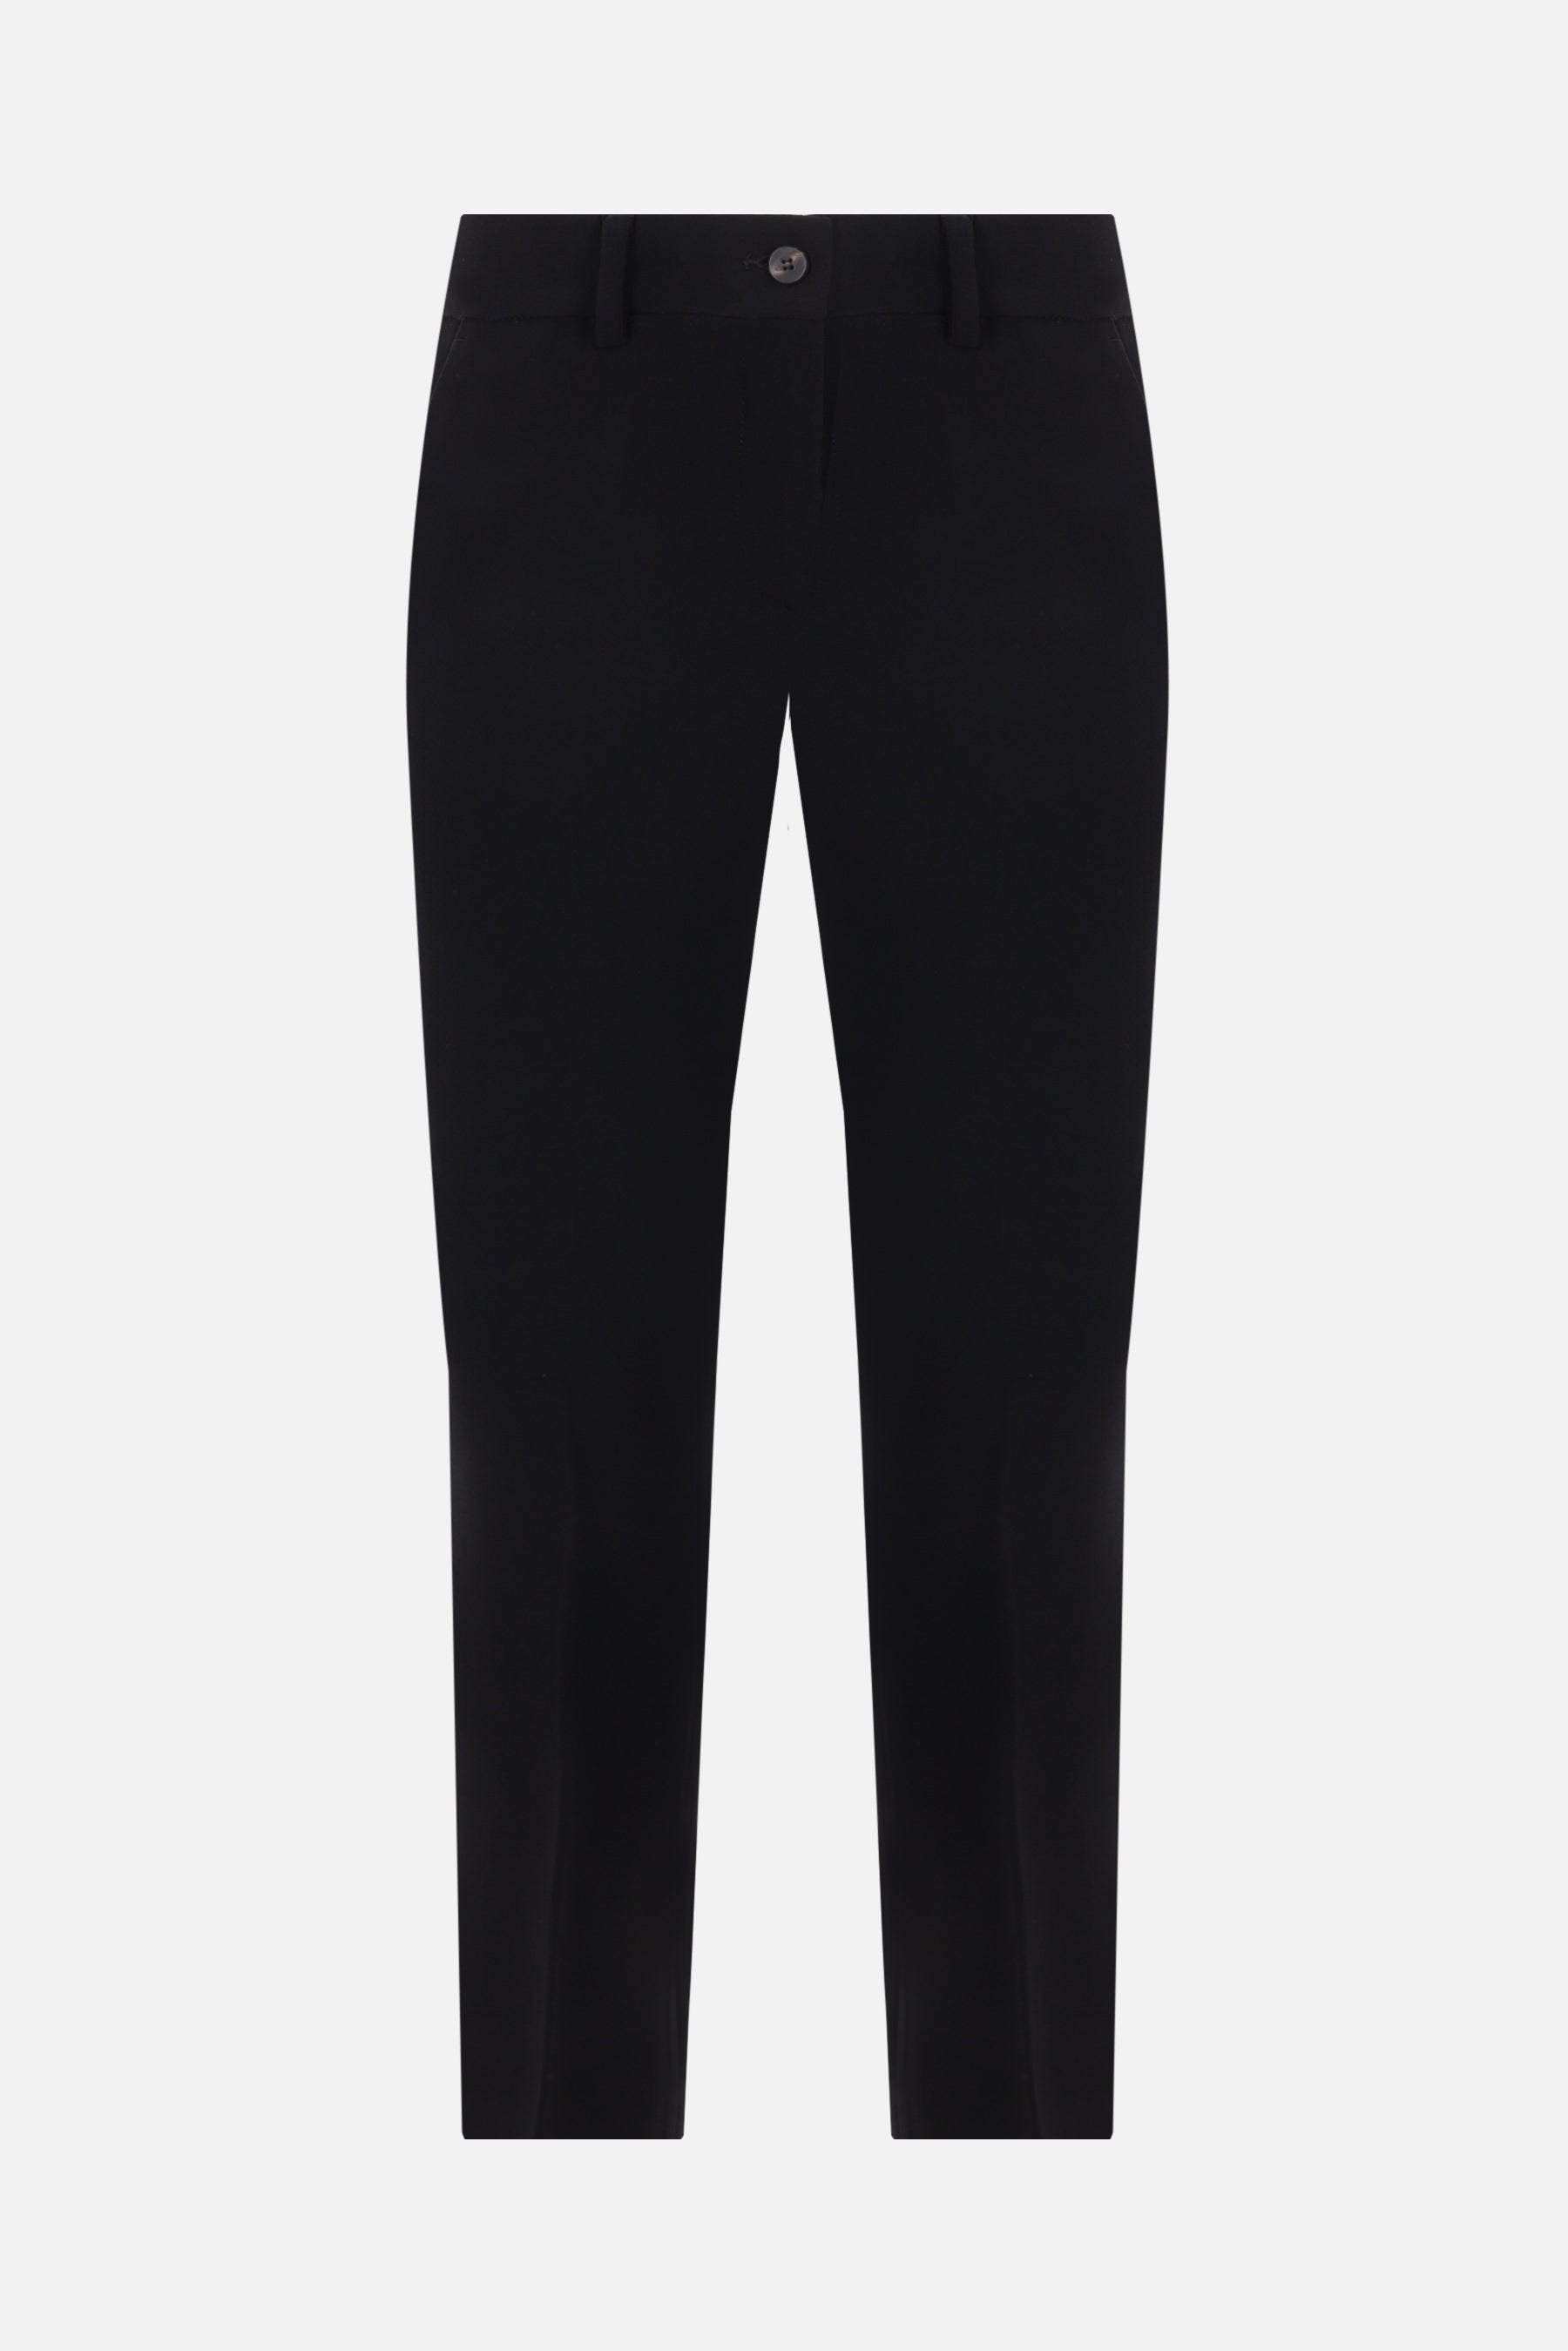 stretch technical fabric trumpet pants